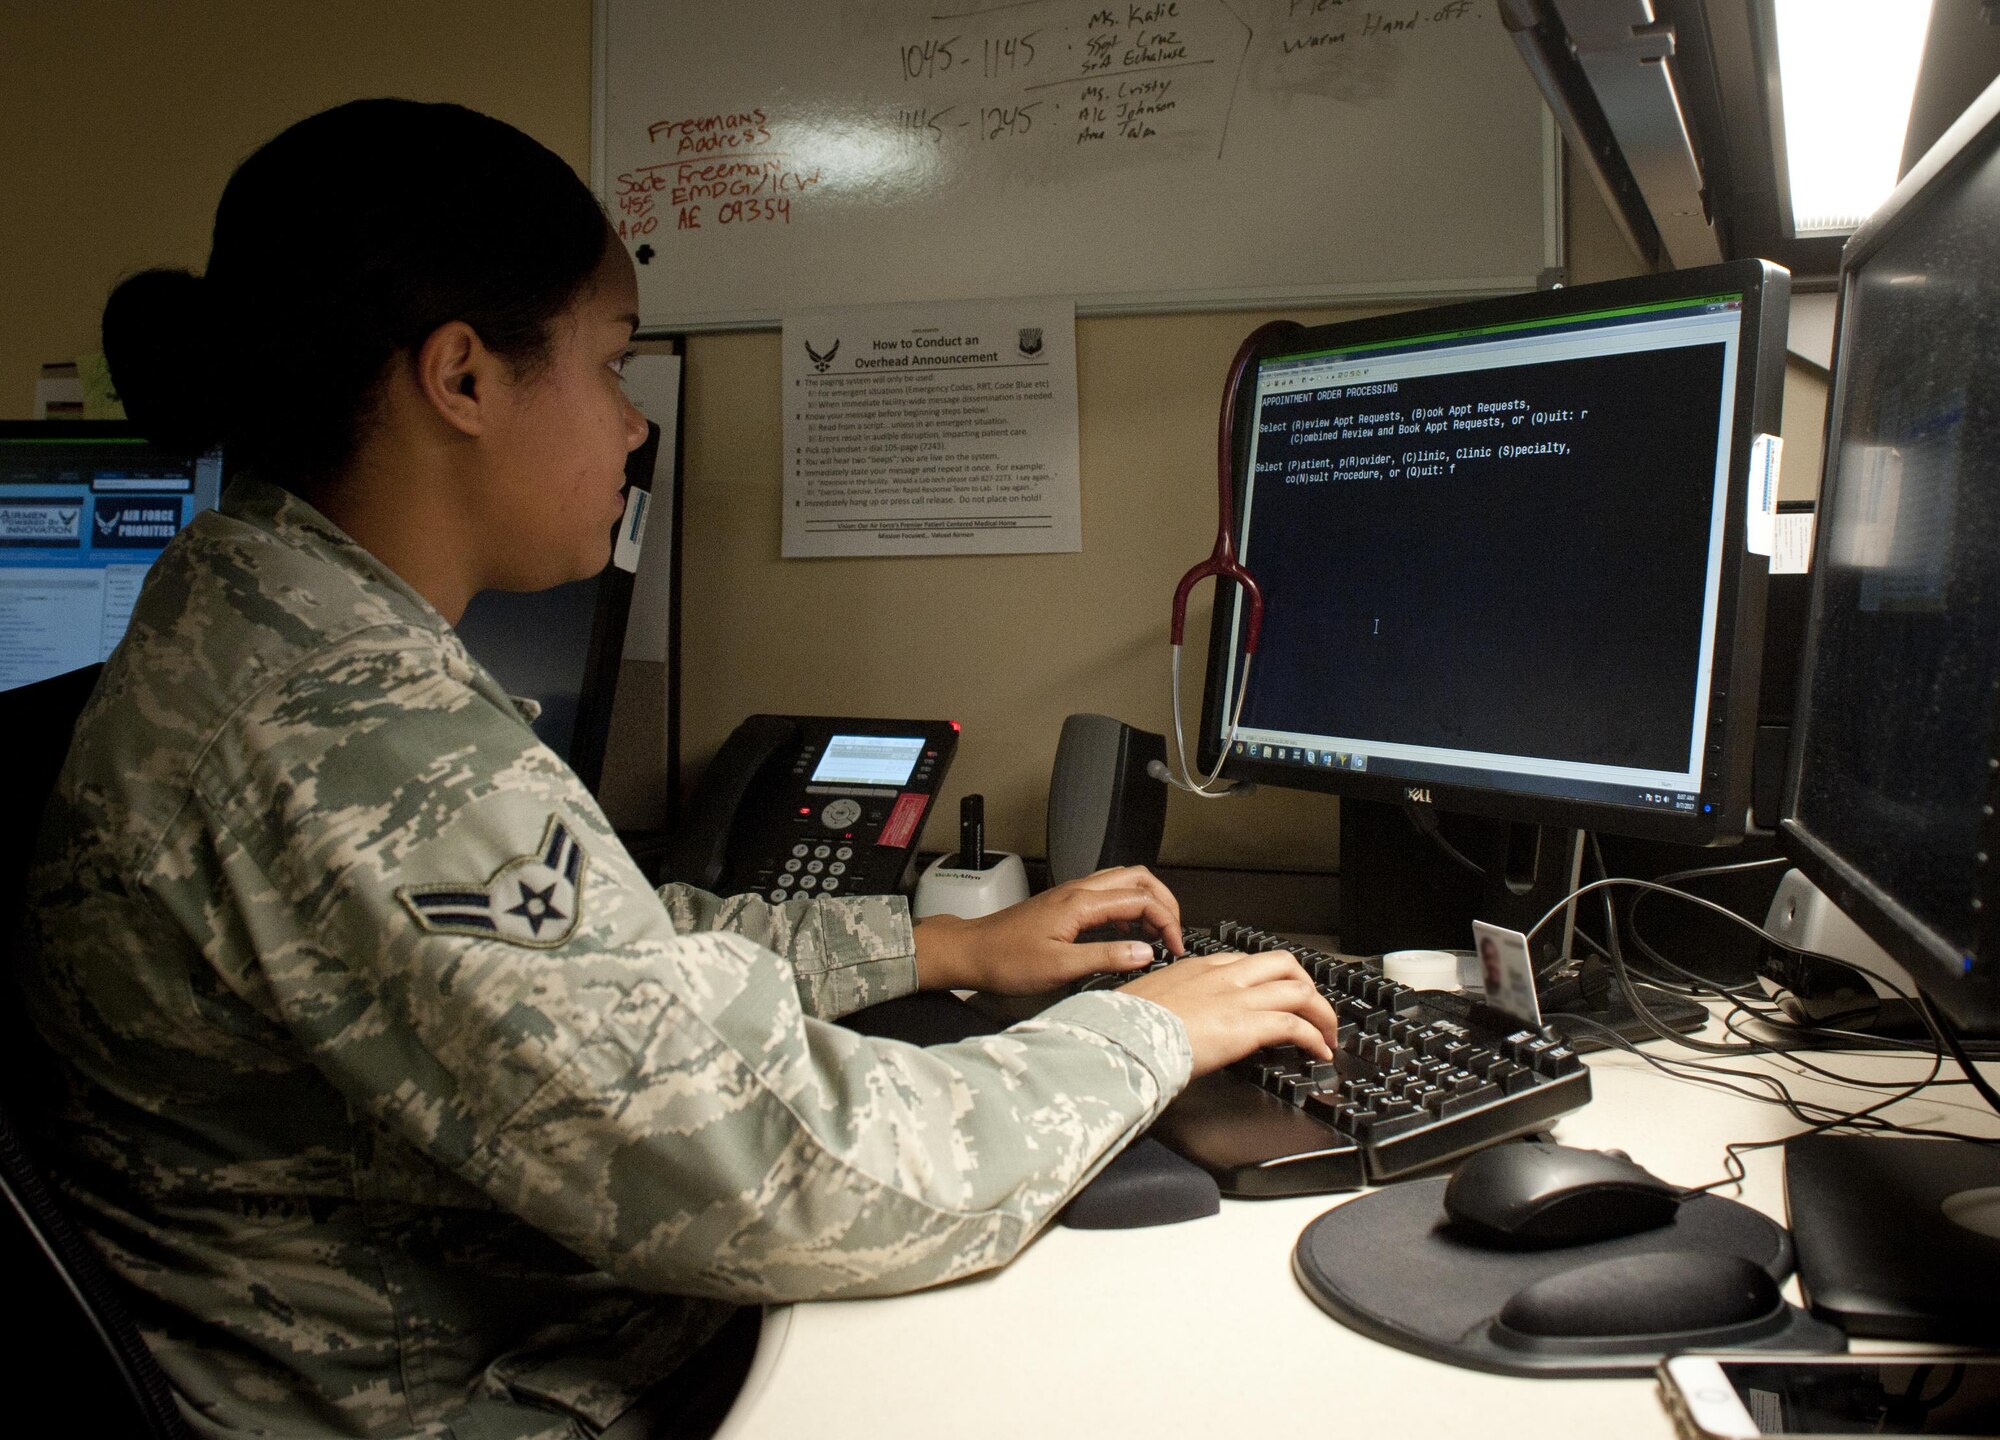 U.S. Air Force Airman 1st Class Monique Johnson, an aerospace medical service technician assigned to the 6th Medical Support Operations Squadron, types information into her computer in the 6th Medical Group Clinic at MacDill Air Force Base, Fla., Sept. 7, 2017. The family health clinic cares for all branches of service, retirees and dependents. (U.S. Air Force photo by Senior Airman Mariette Adams)